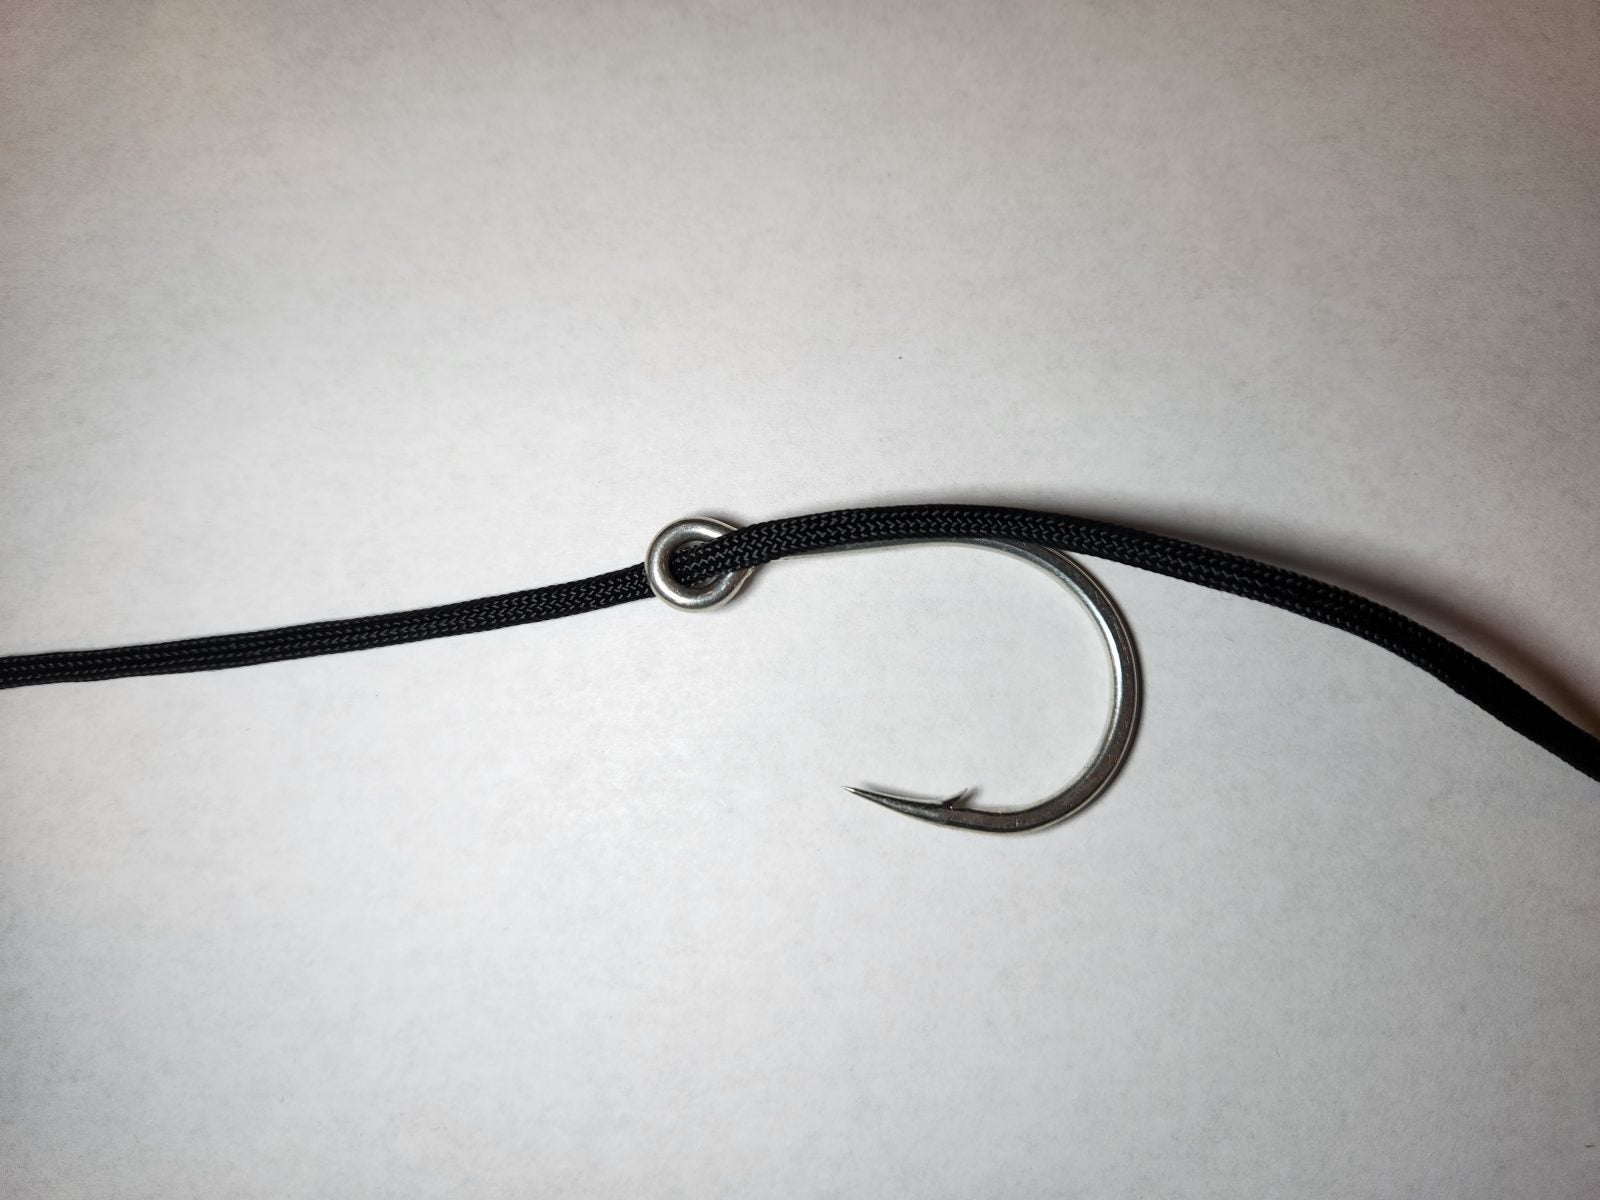 Are You Nuts? Know your Fishing Knots! – Snell Knot